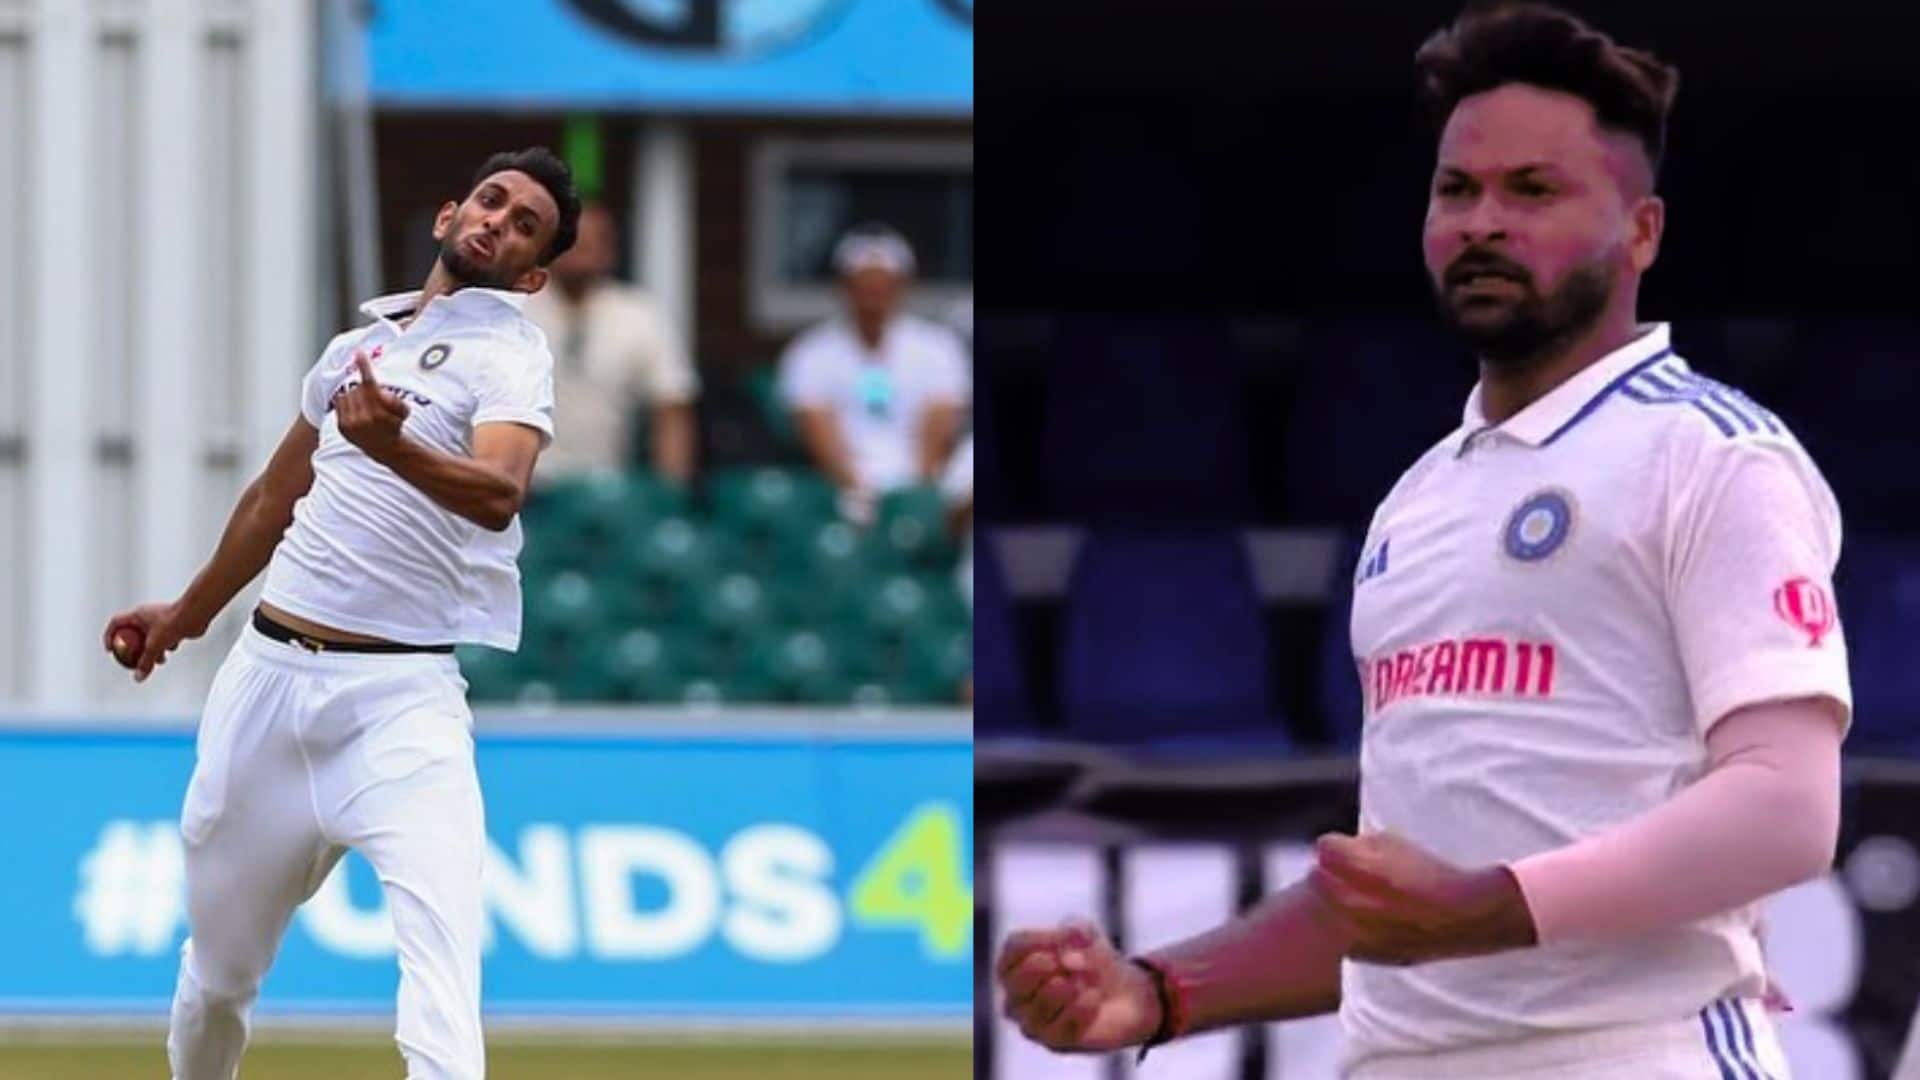 Mukesh Kumar Or Prasidh To Be Picked In Test Squad For SA Tour - Reports